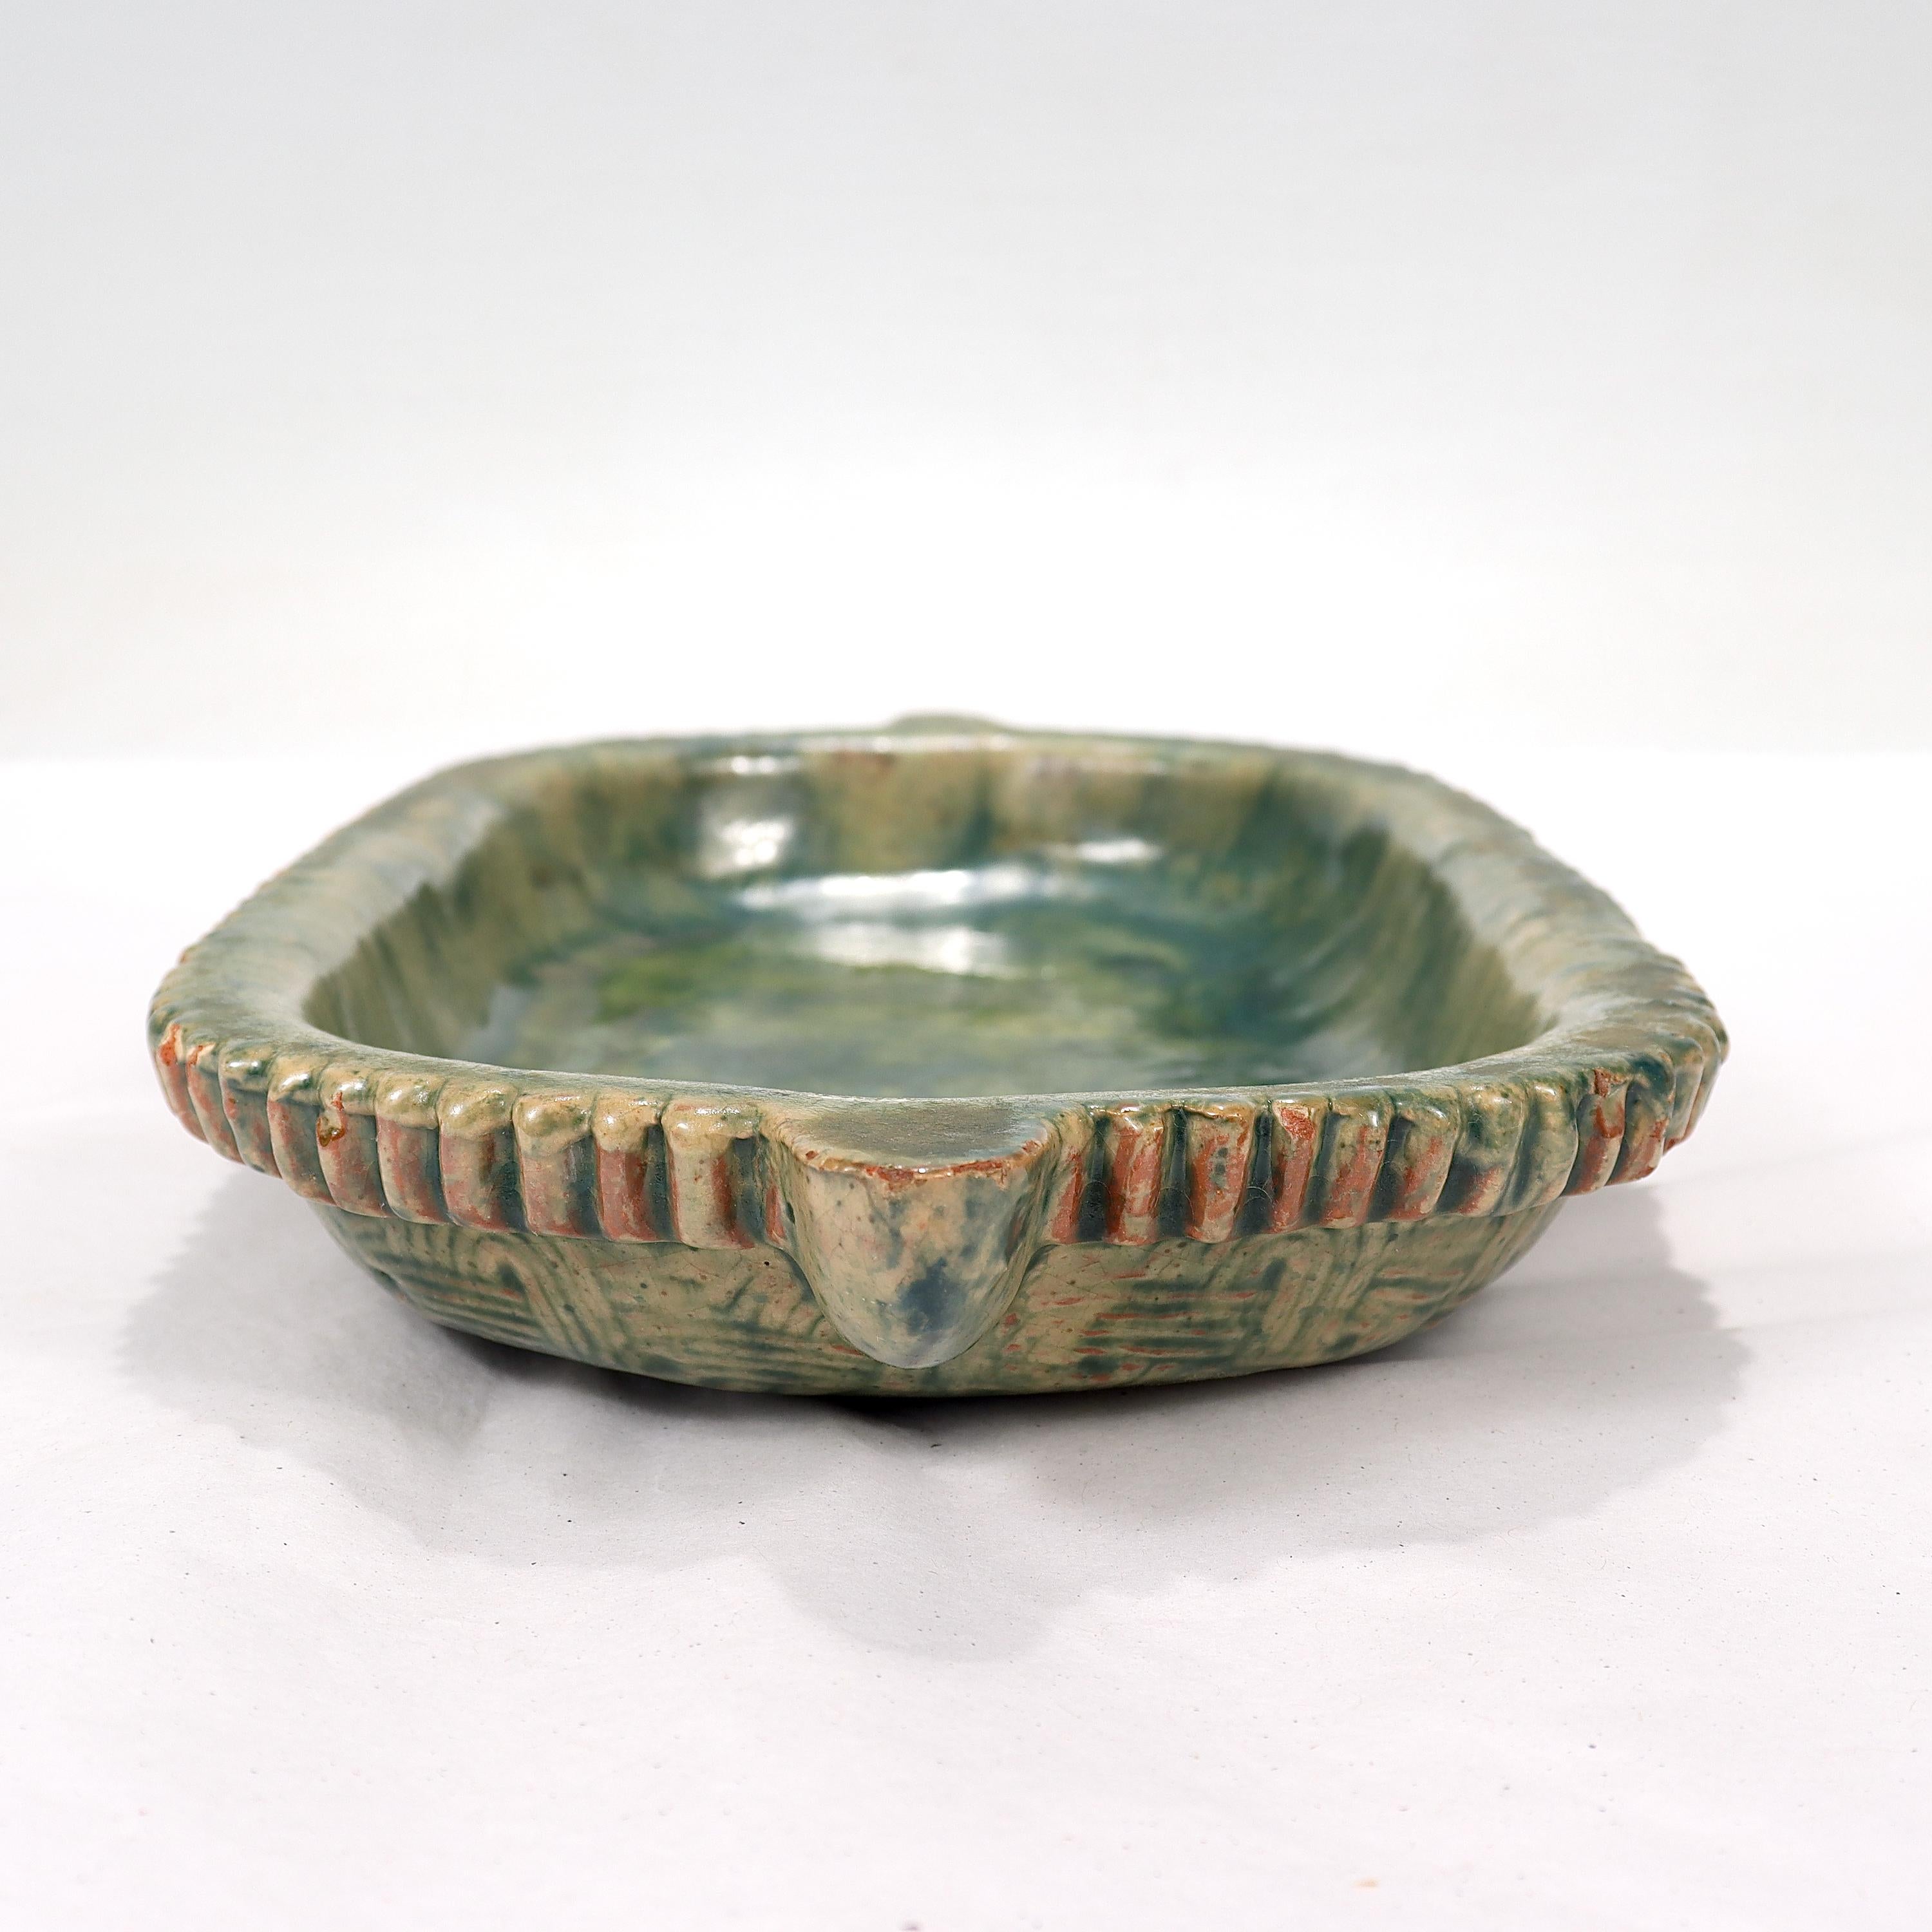 Rare Moravian Pottery Works / Mercer Tile Company Low Bowl or Oblong Plate In Good Condition For Sale In Philadelphia, PA